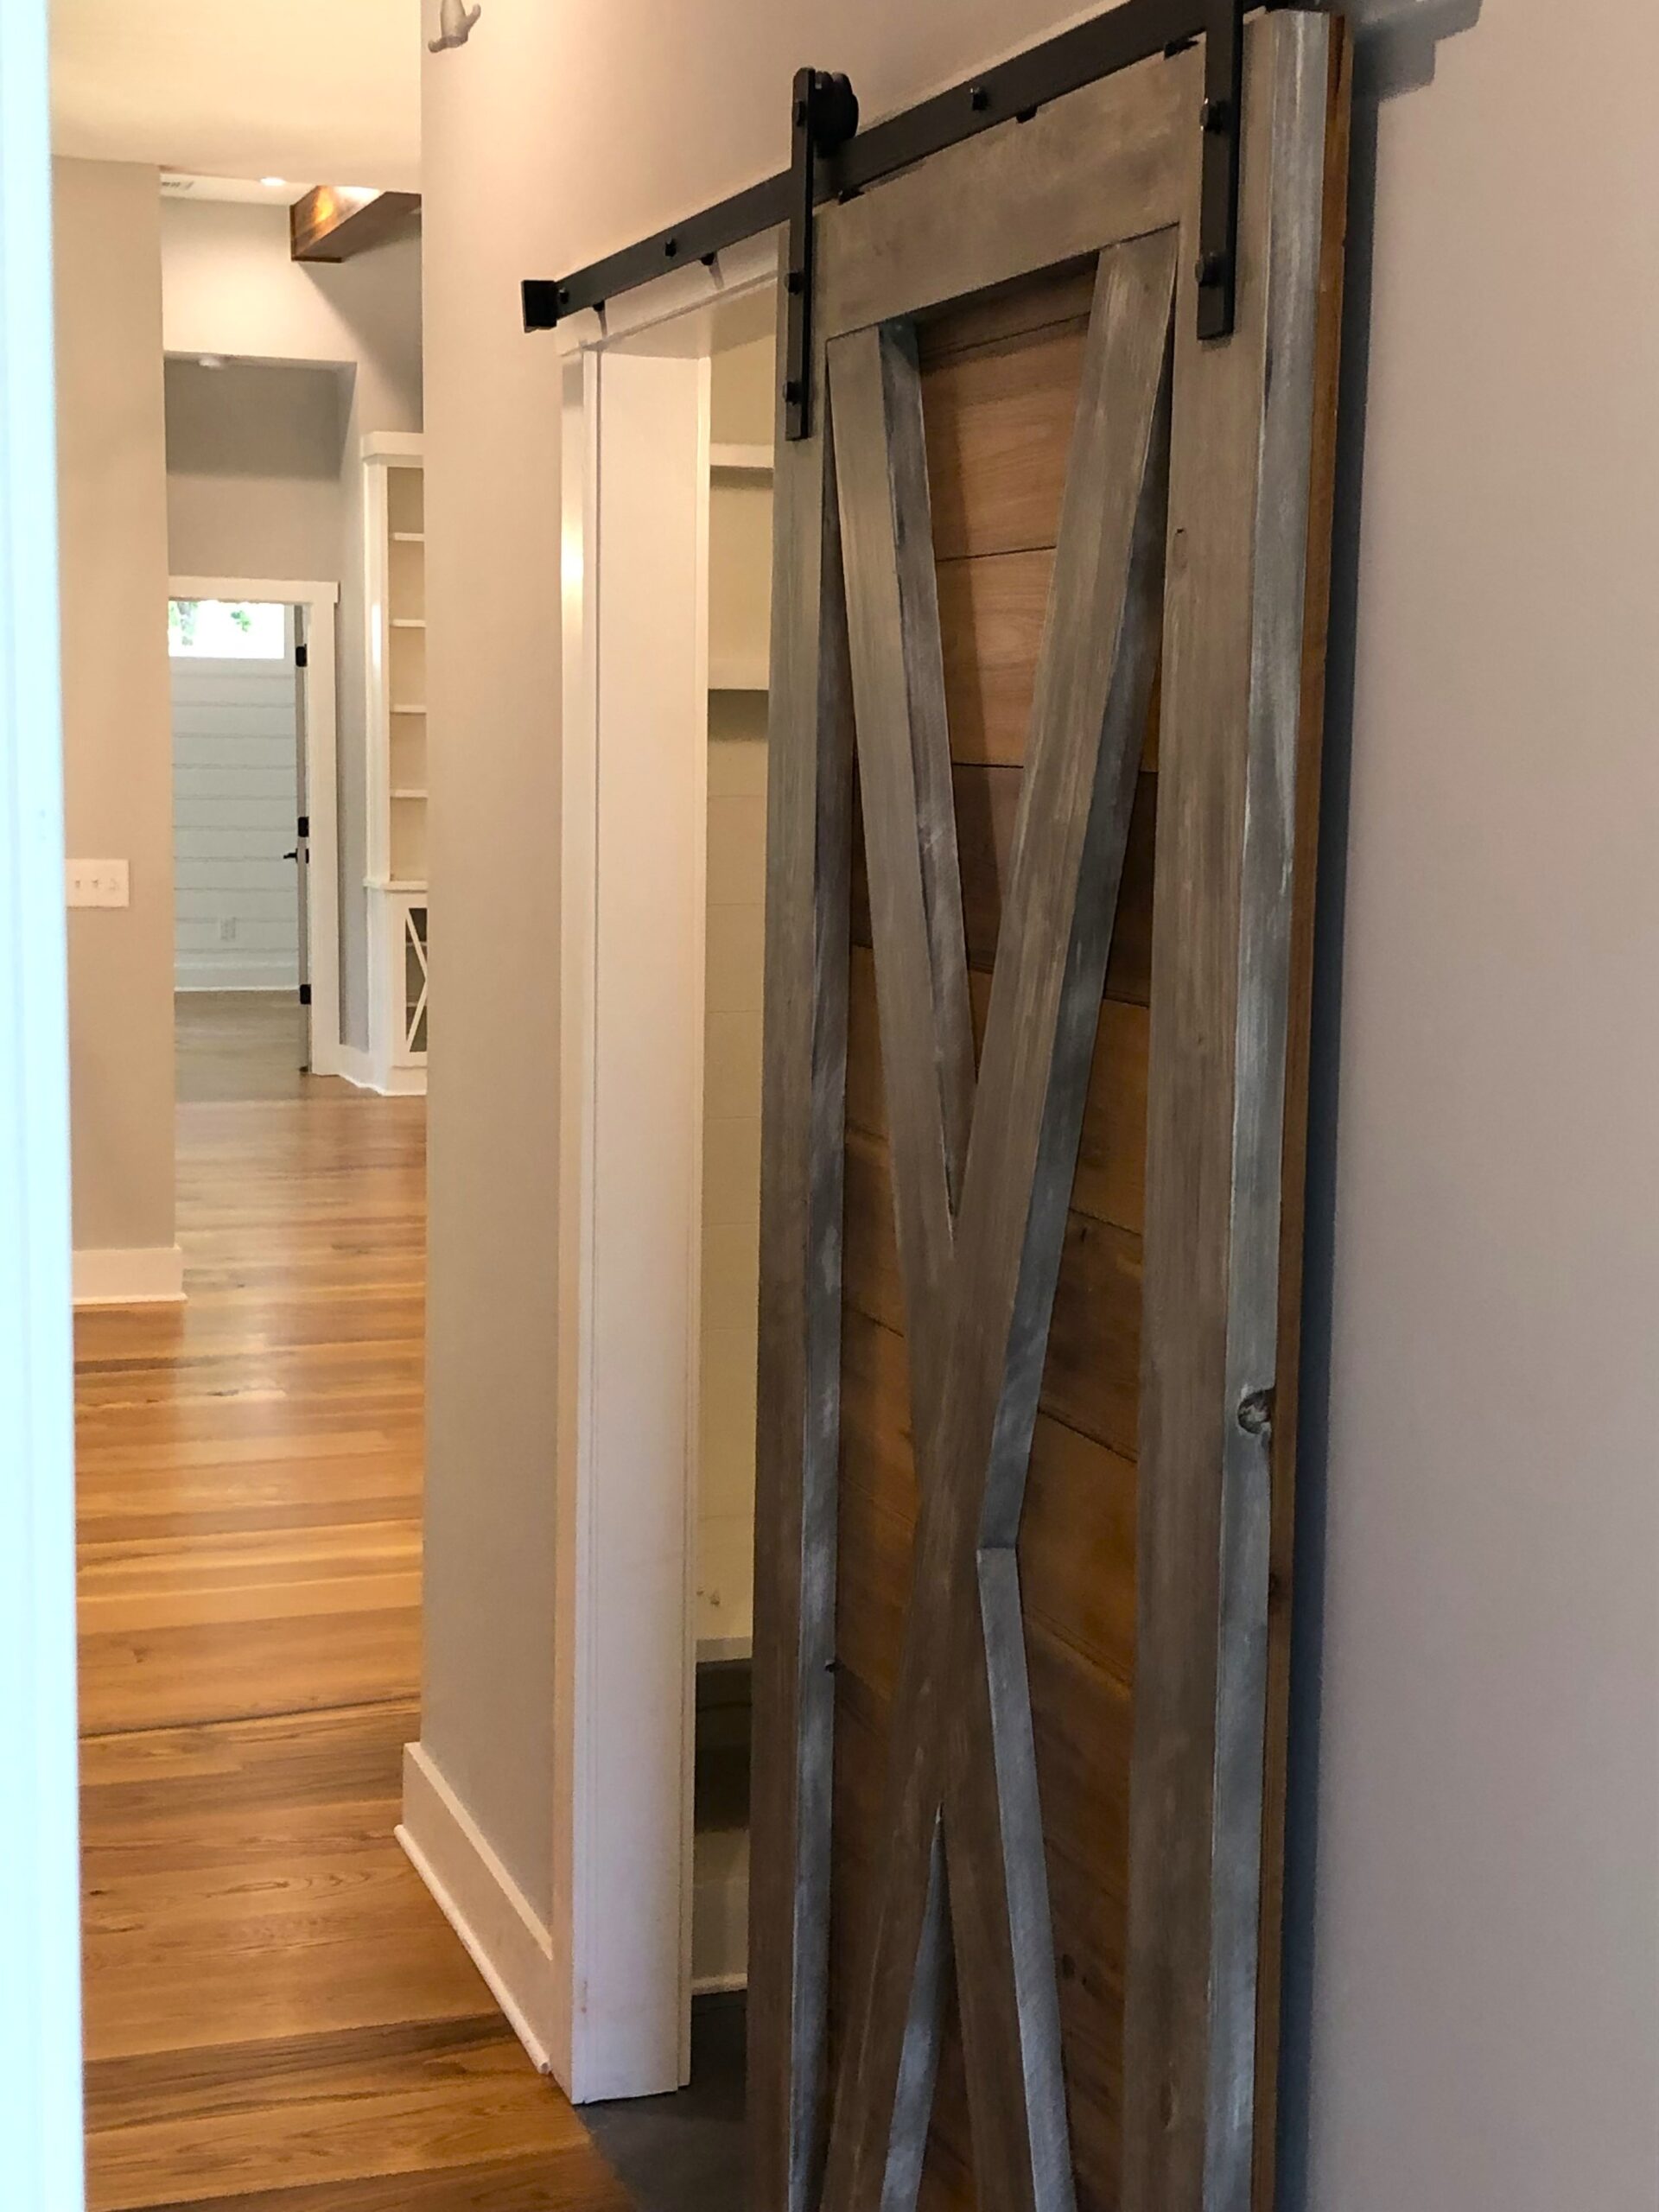 Completed installation of a barn door entering a walk in closet.